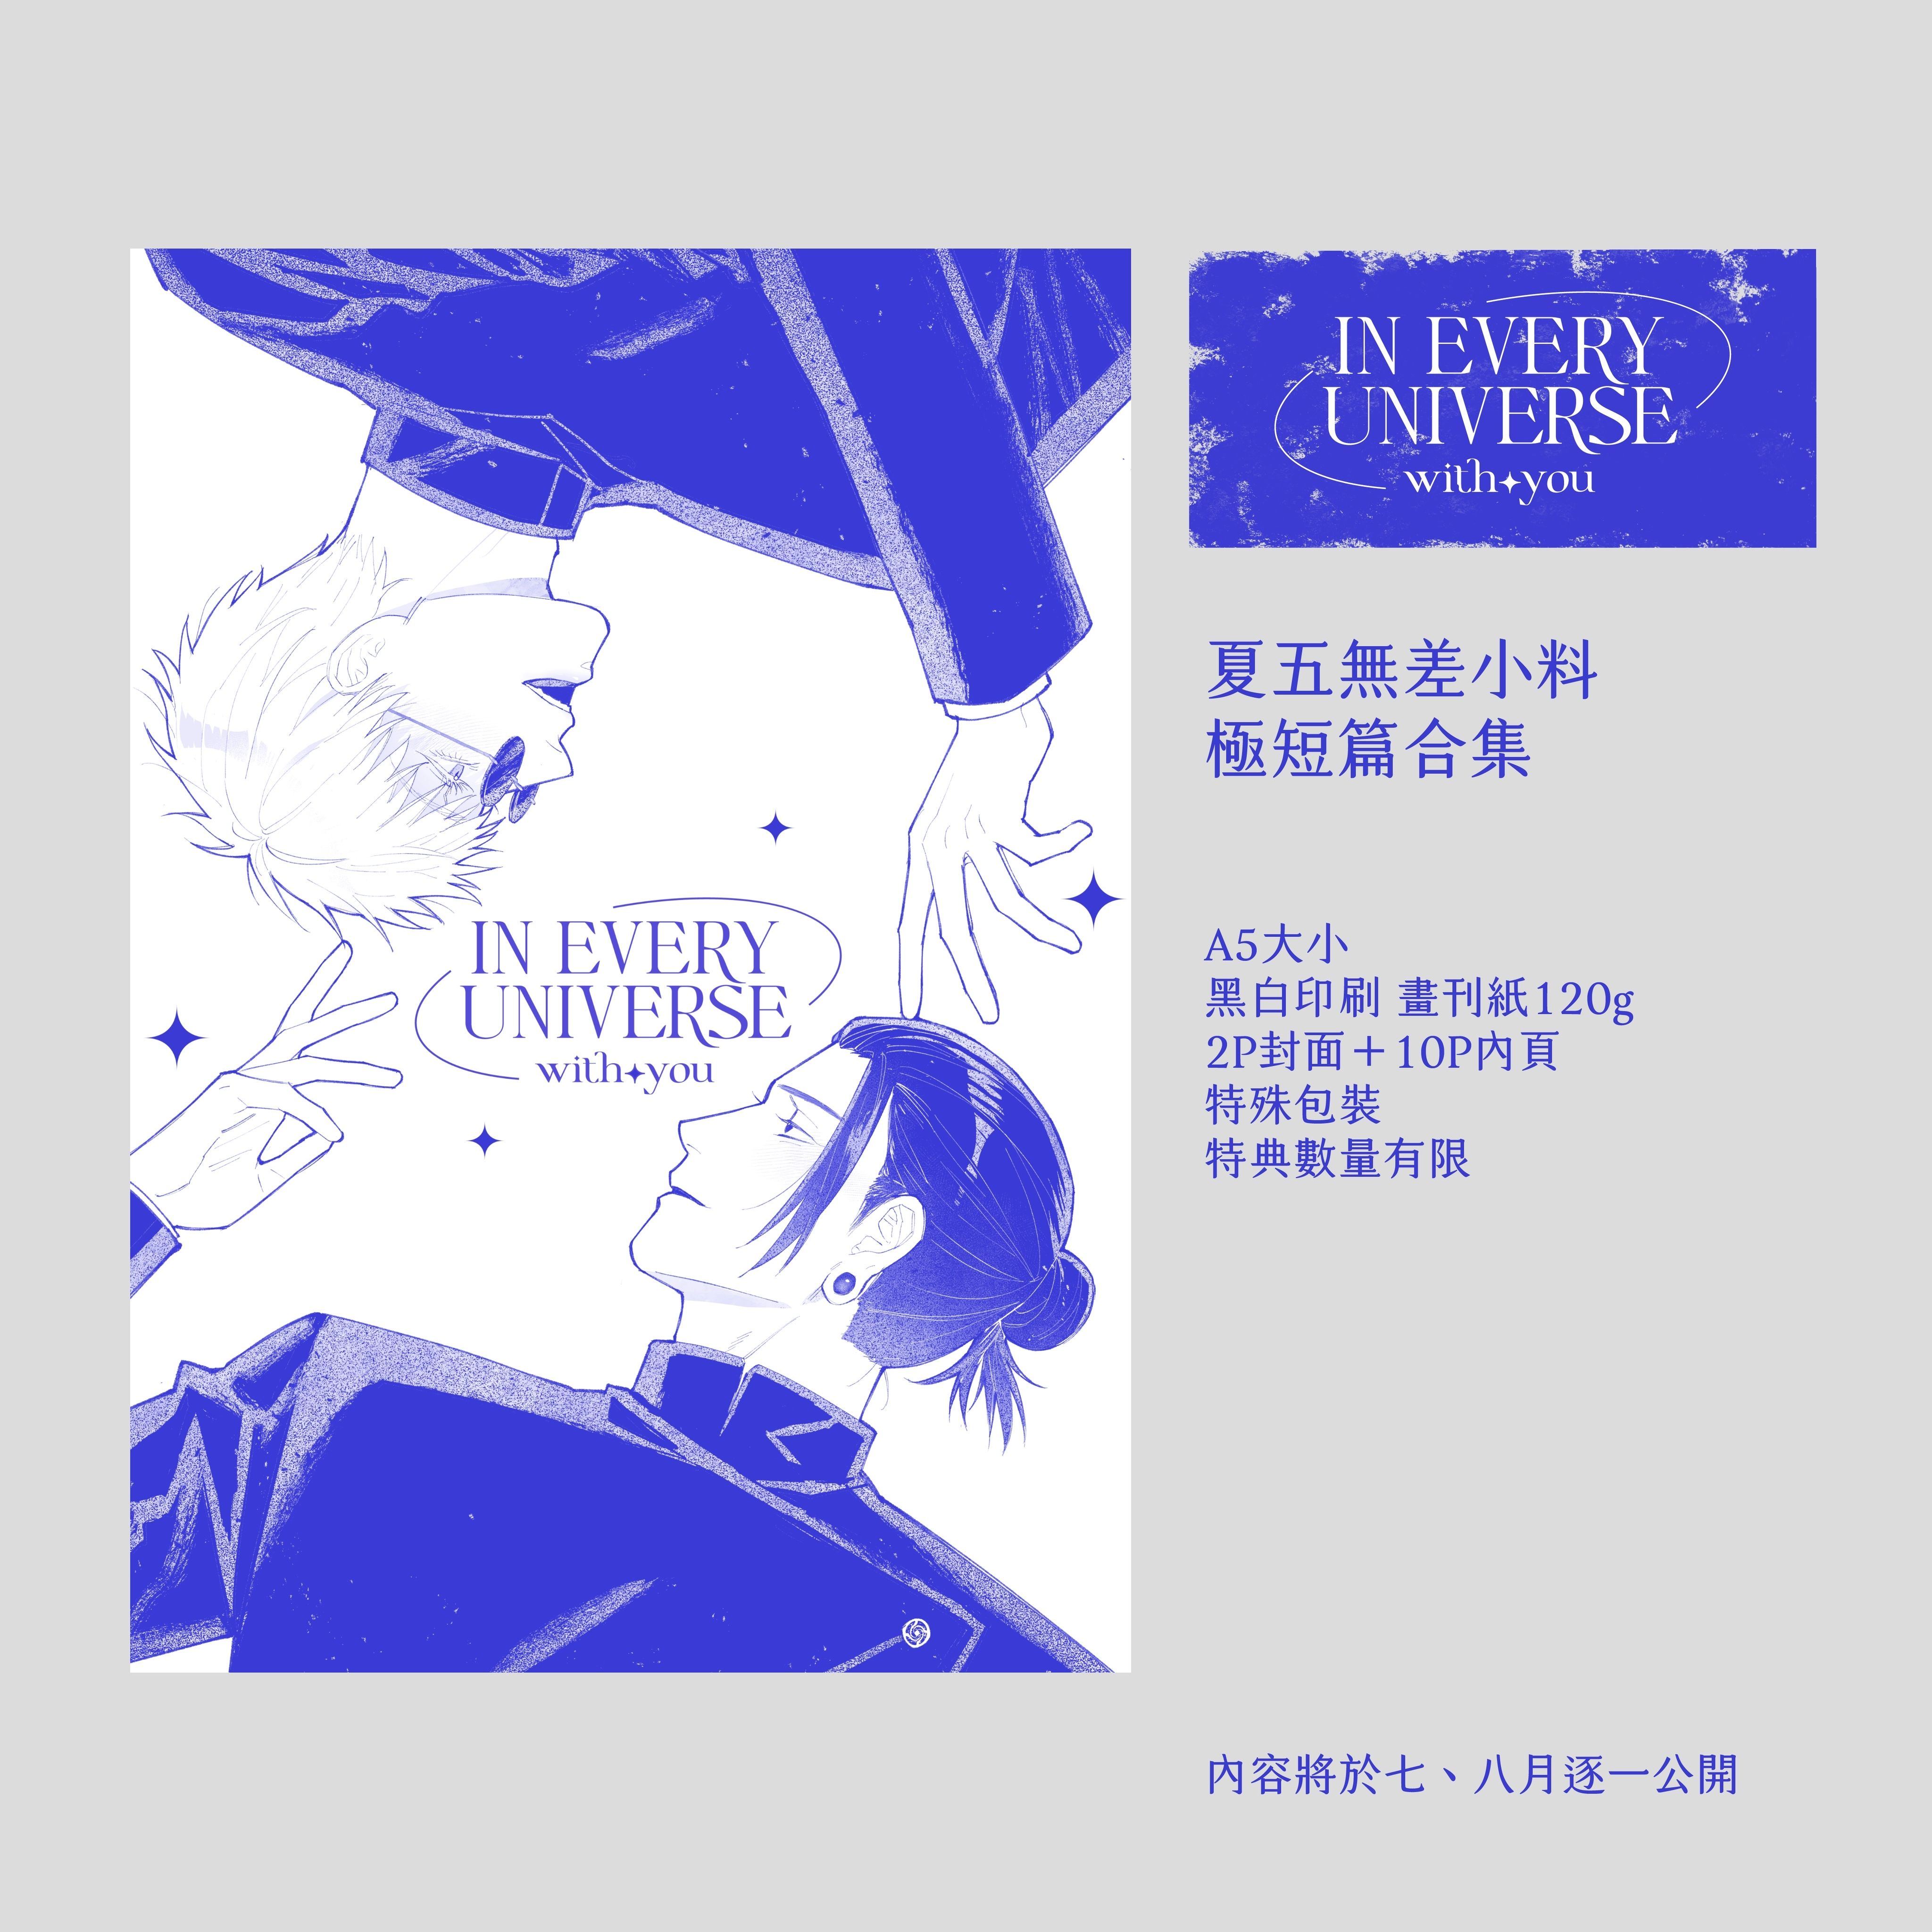 《IN EVERY UNIVERSE: with you》夏五無差小料 試閱圖